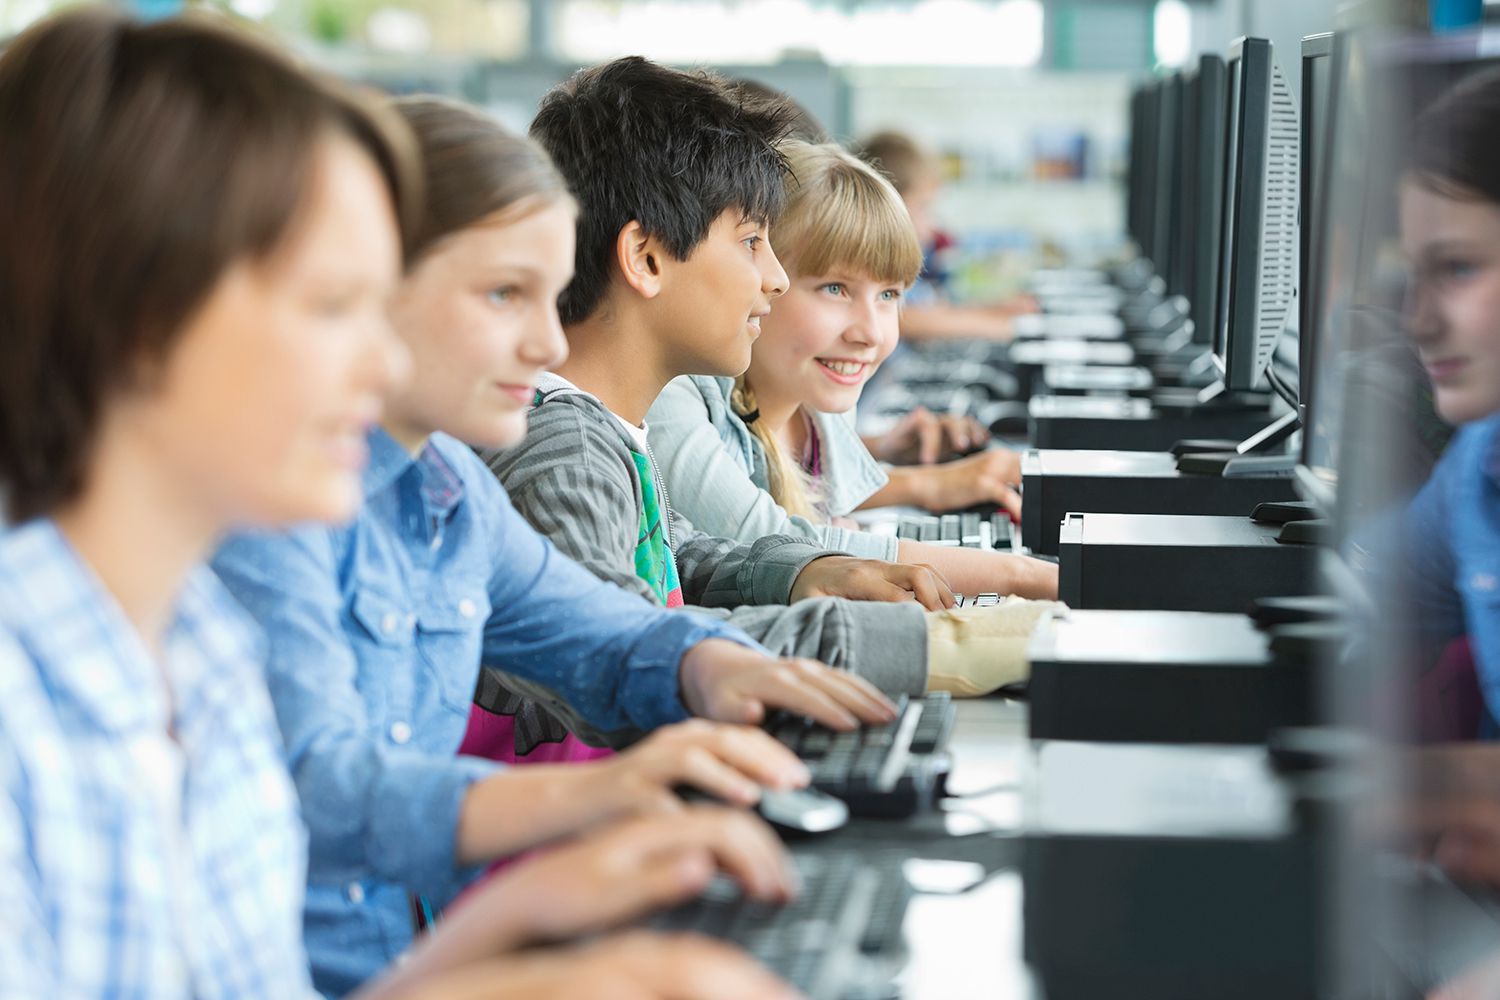 What Is New In Educational Technology